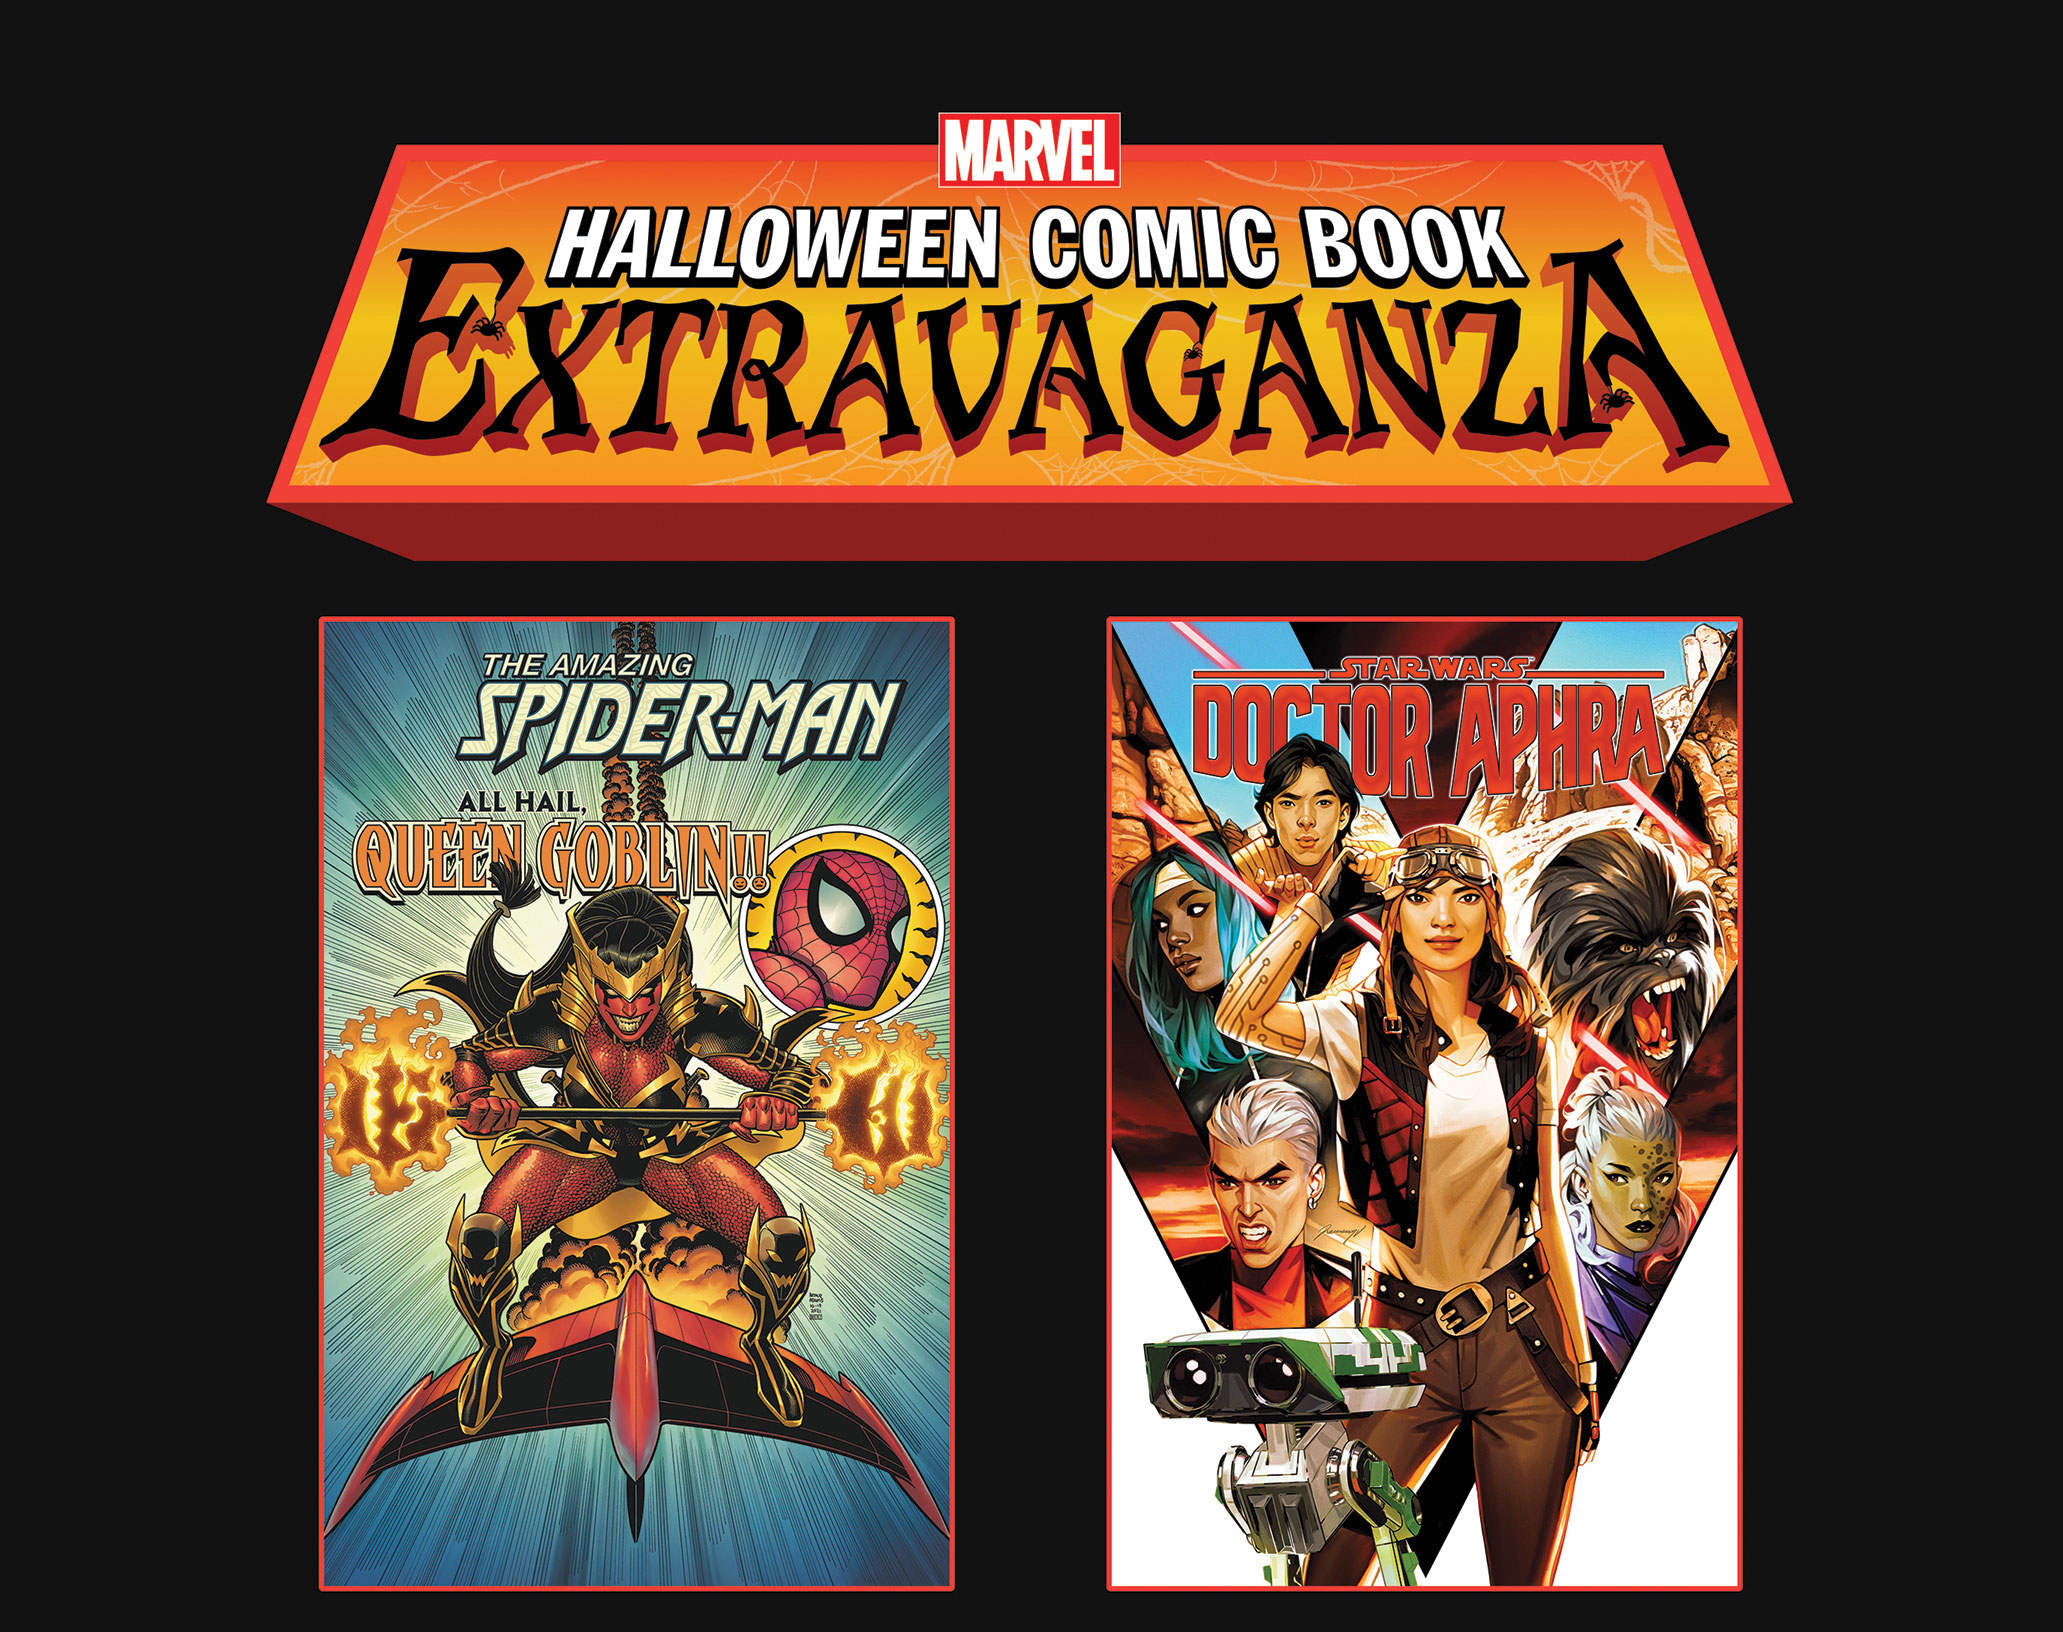 Marvel announces Halloween Extravaganza plans on October 29th